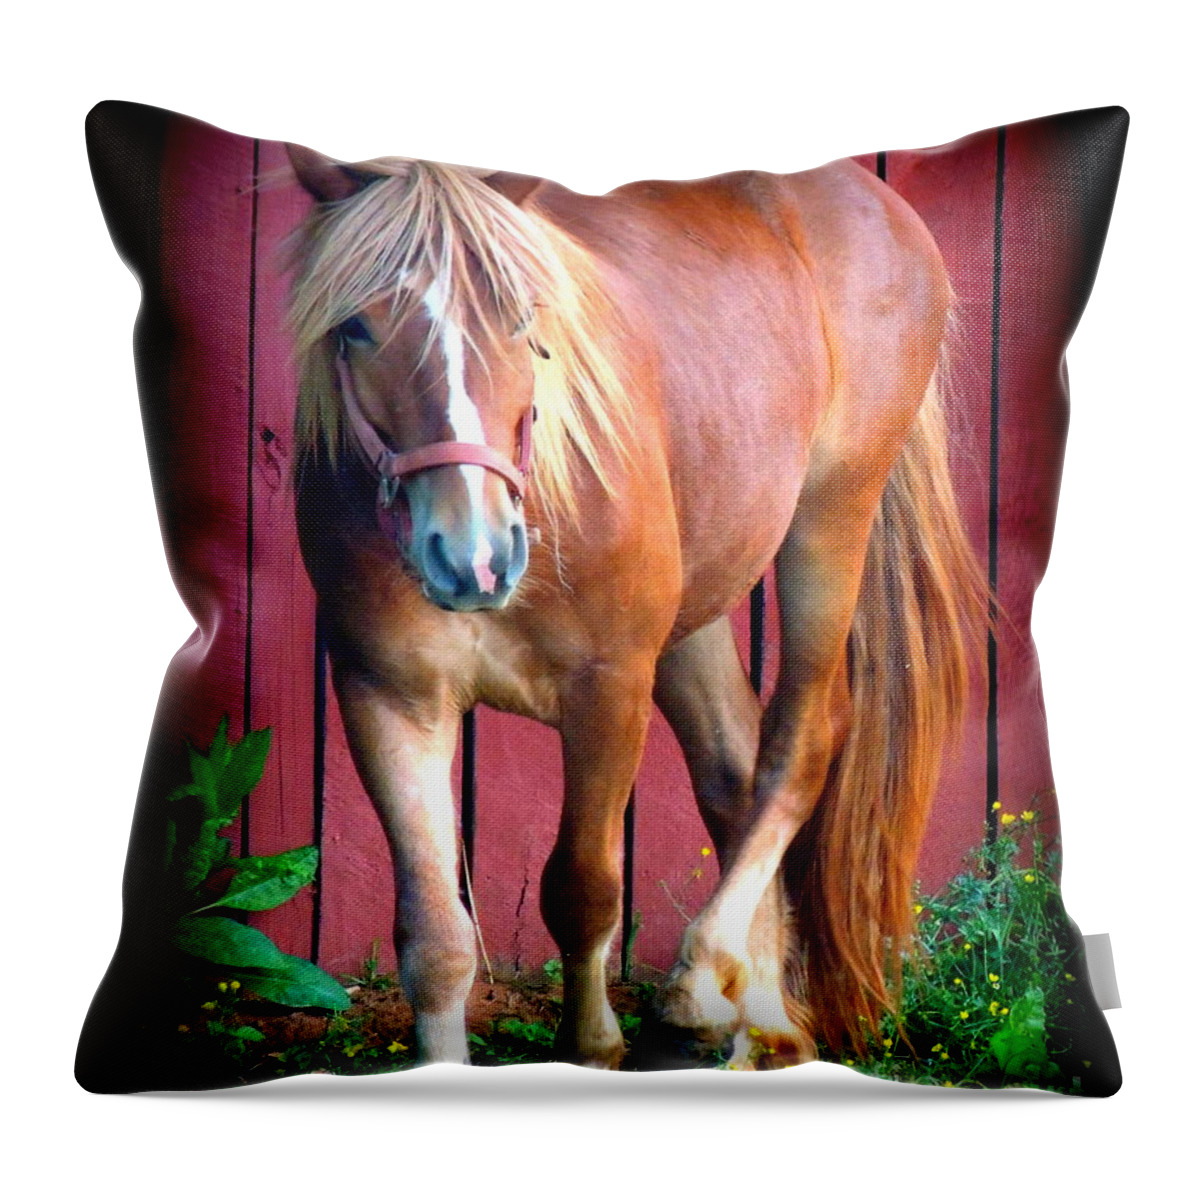 Horse Throw Pillow featuring the photograph Hitch by Rabiah Seminole